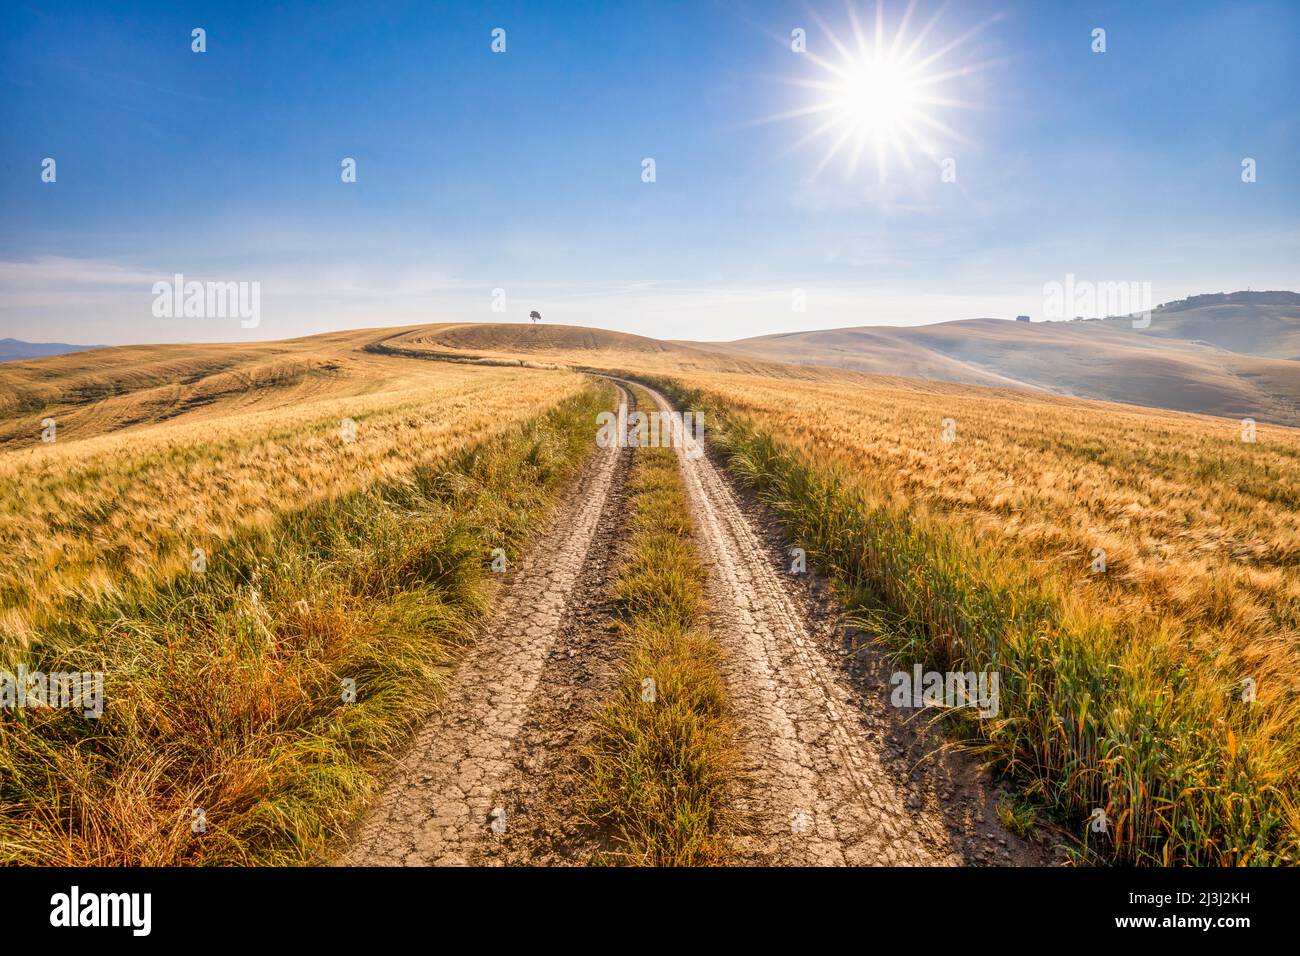 Europe, Italy, Tuscany, Siena, landscape of Crete Senesi, countryside landscape, country road among the cultivated fields, municipality of Asciano Stock Photo